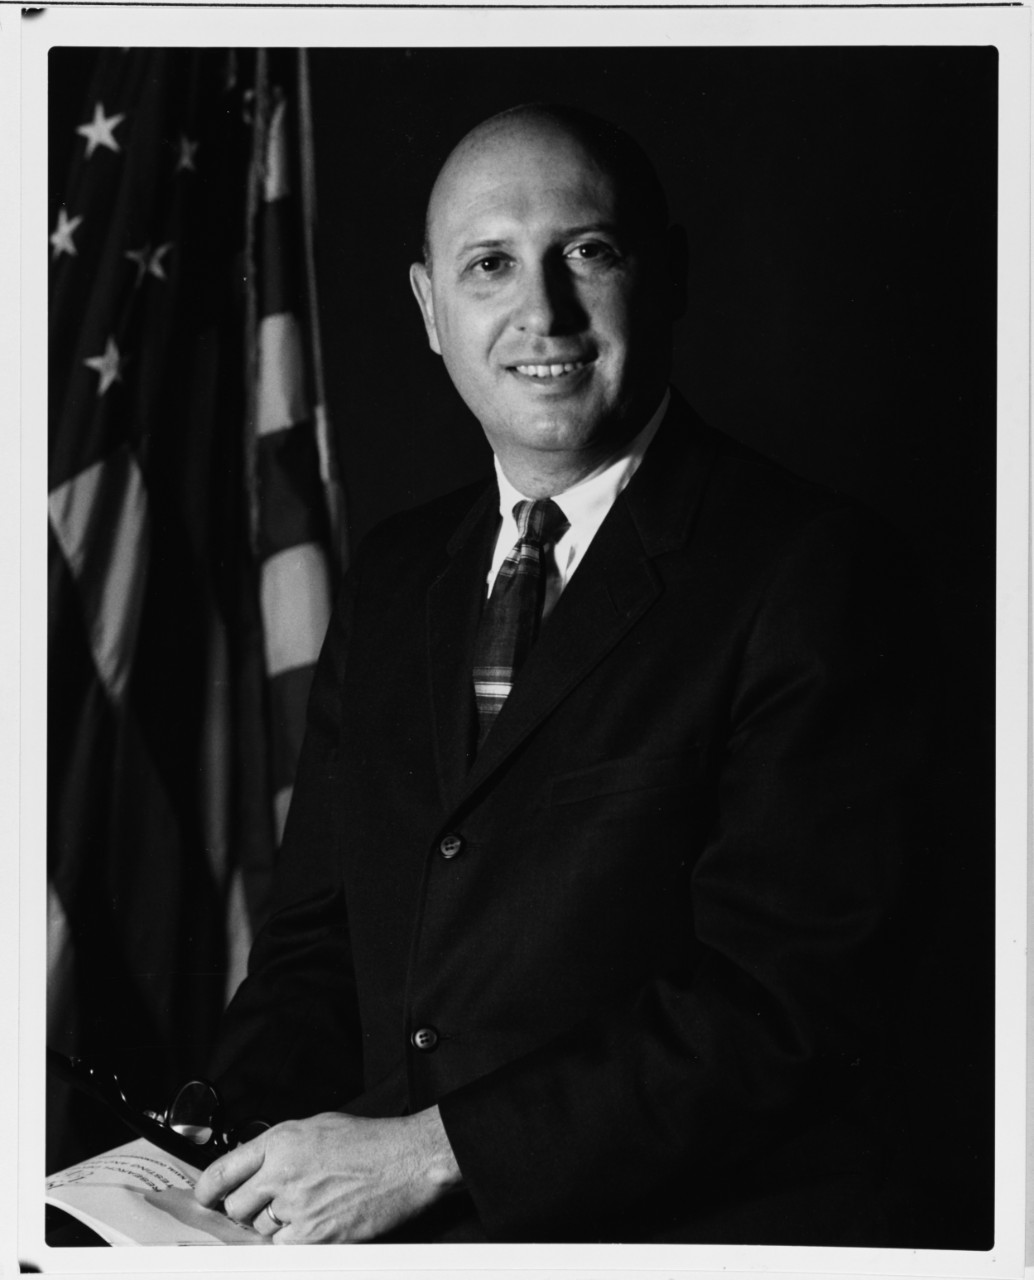 The Honorable Robert A. Frosch, Assistant Secretary of the Navy for Research and Development, 18 October 1966